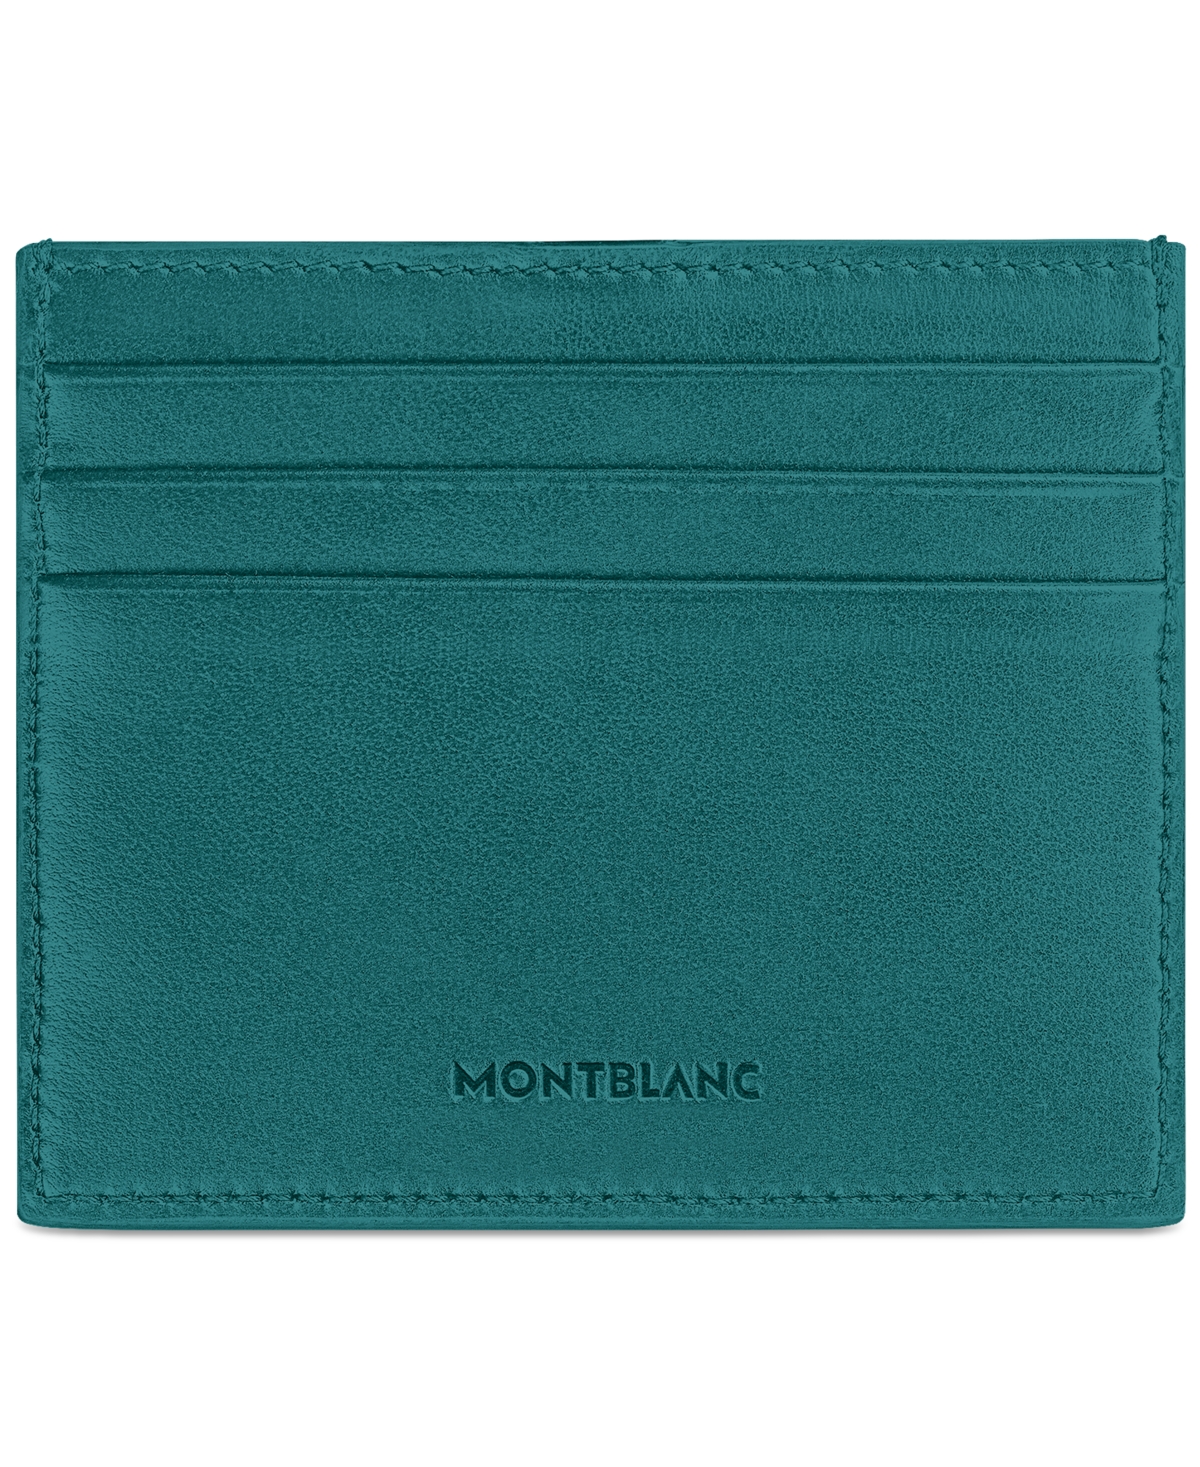 Montblanc Extreme 3.0 Leather 6cc Card Holder In Green